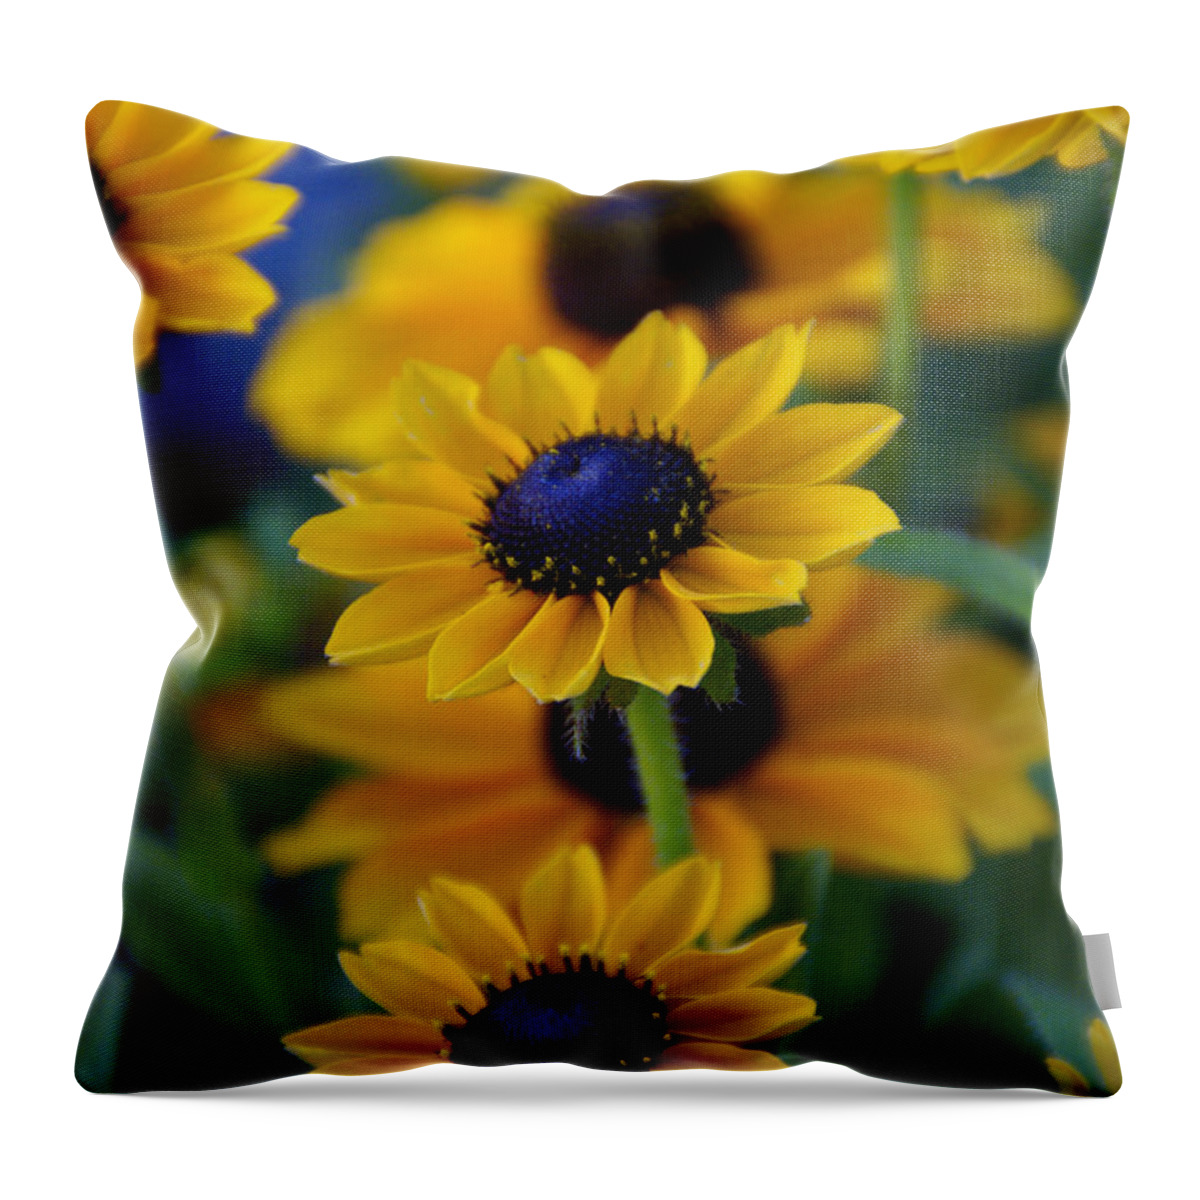 Yellow Throw Pillow featuring the photograph Royal Blue by Linda Shafer